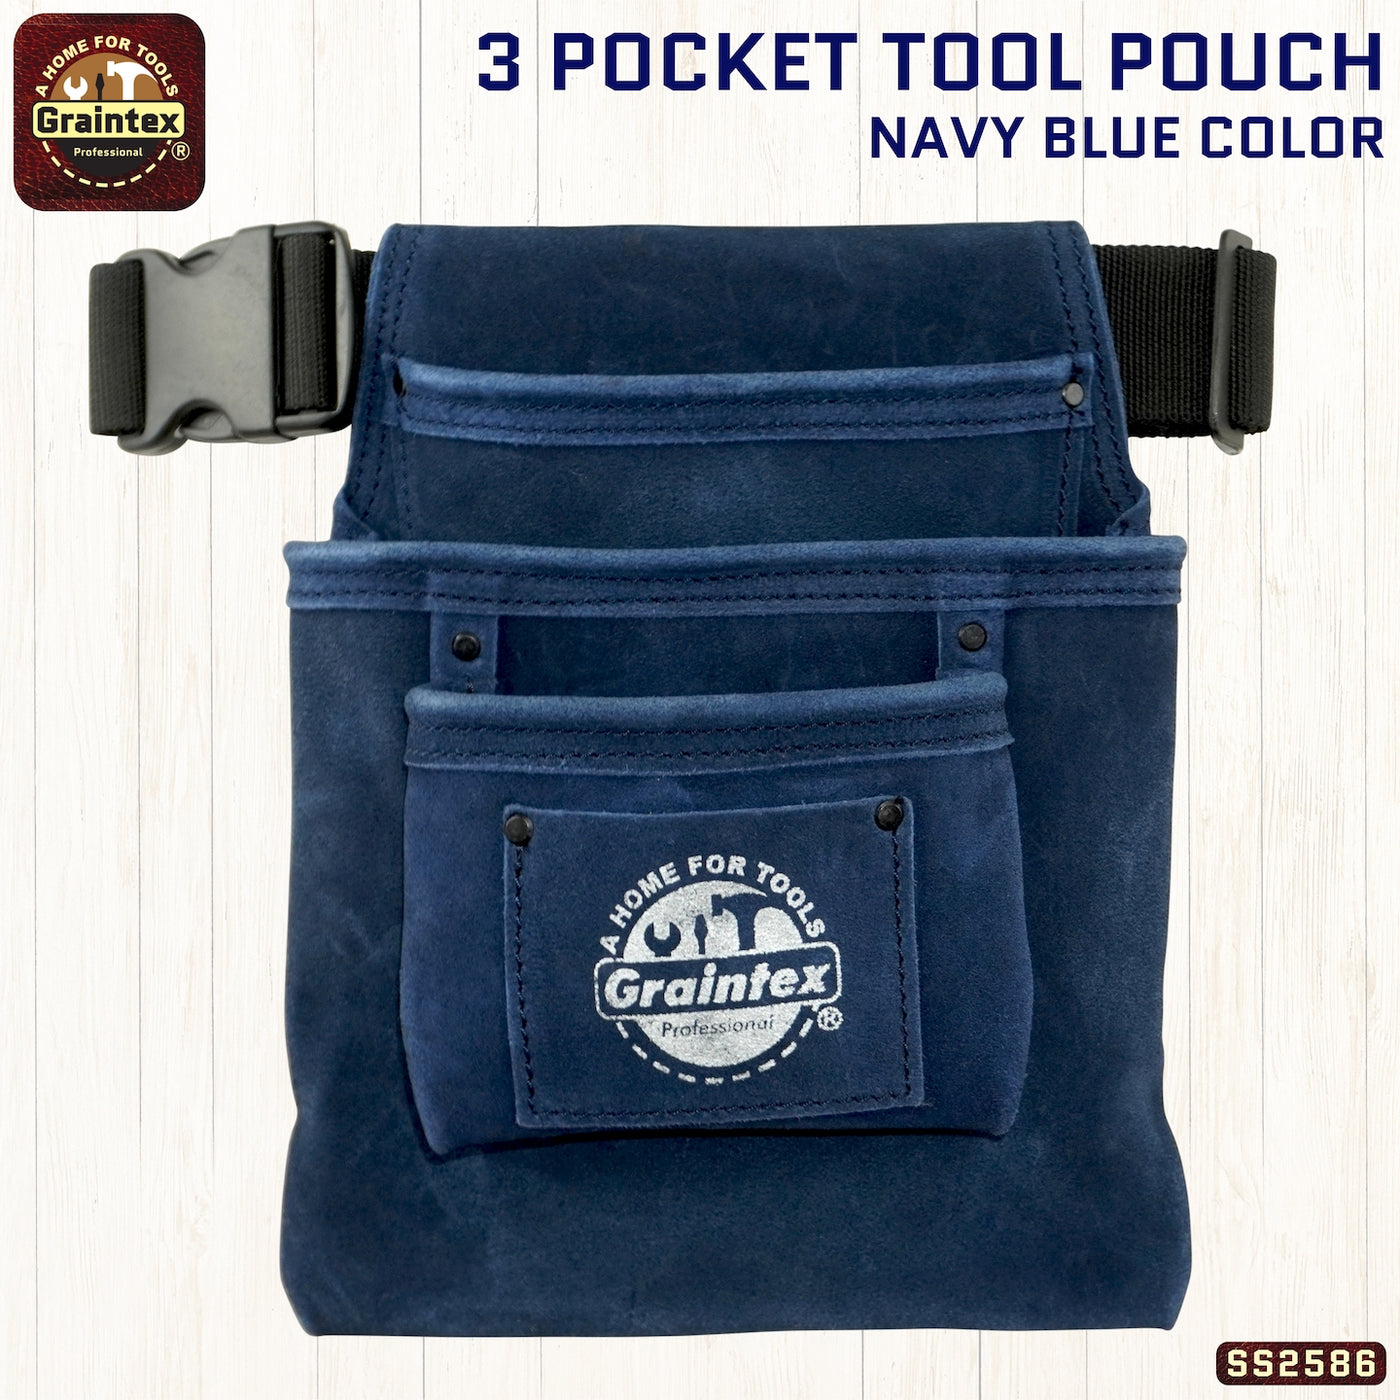 SS2586 :: 3 Pocket Nail & Tool Pouch Navy Blue Color Suede Leather with Belt